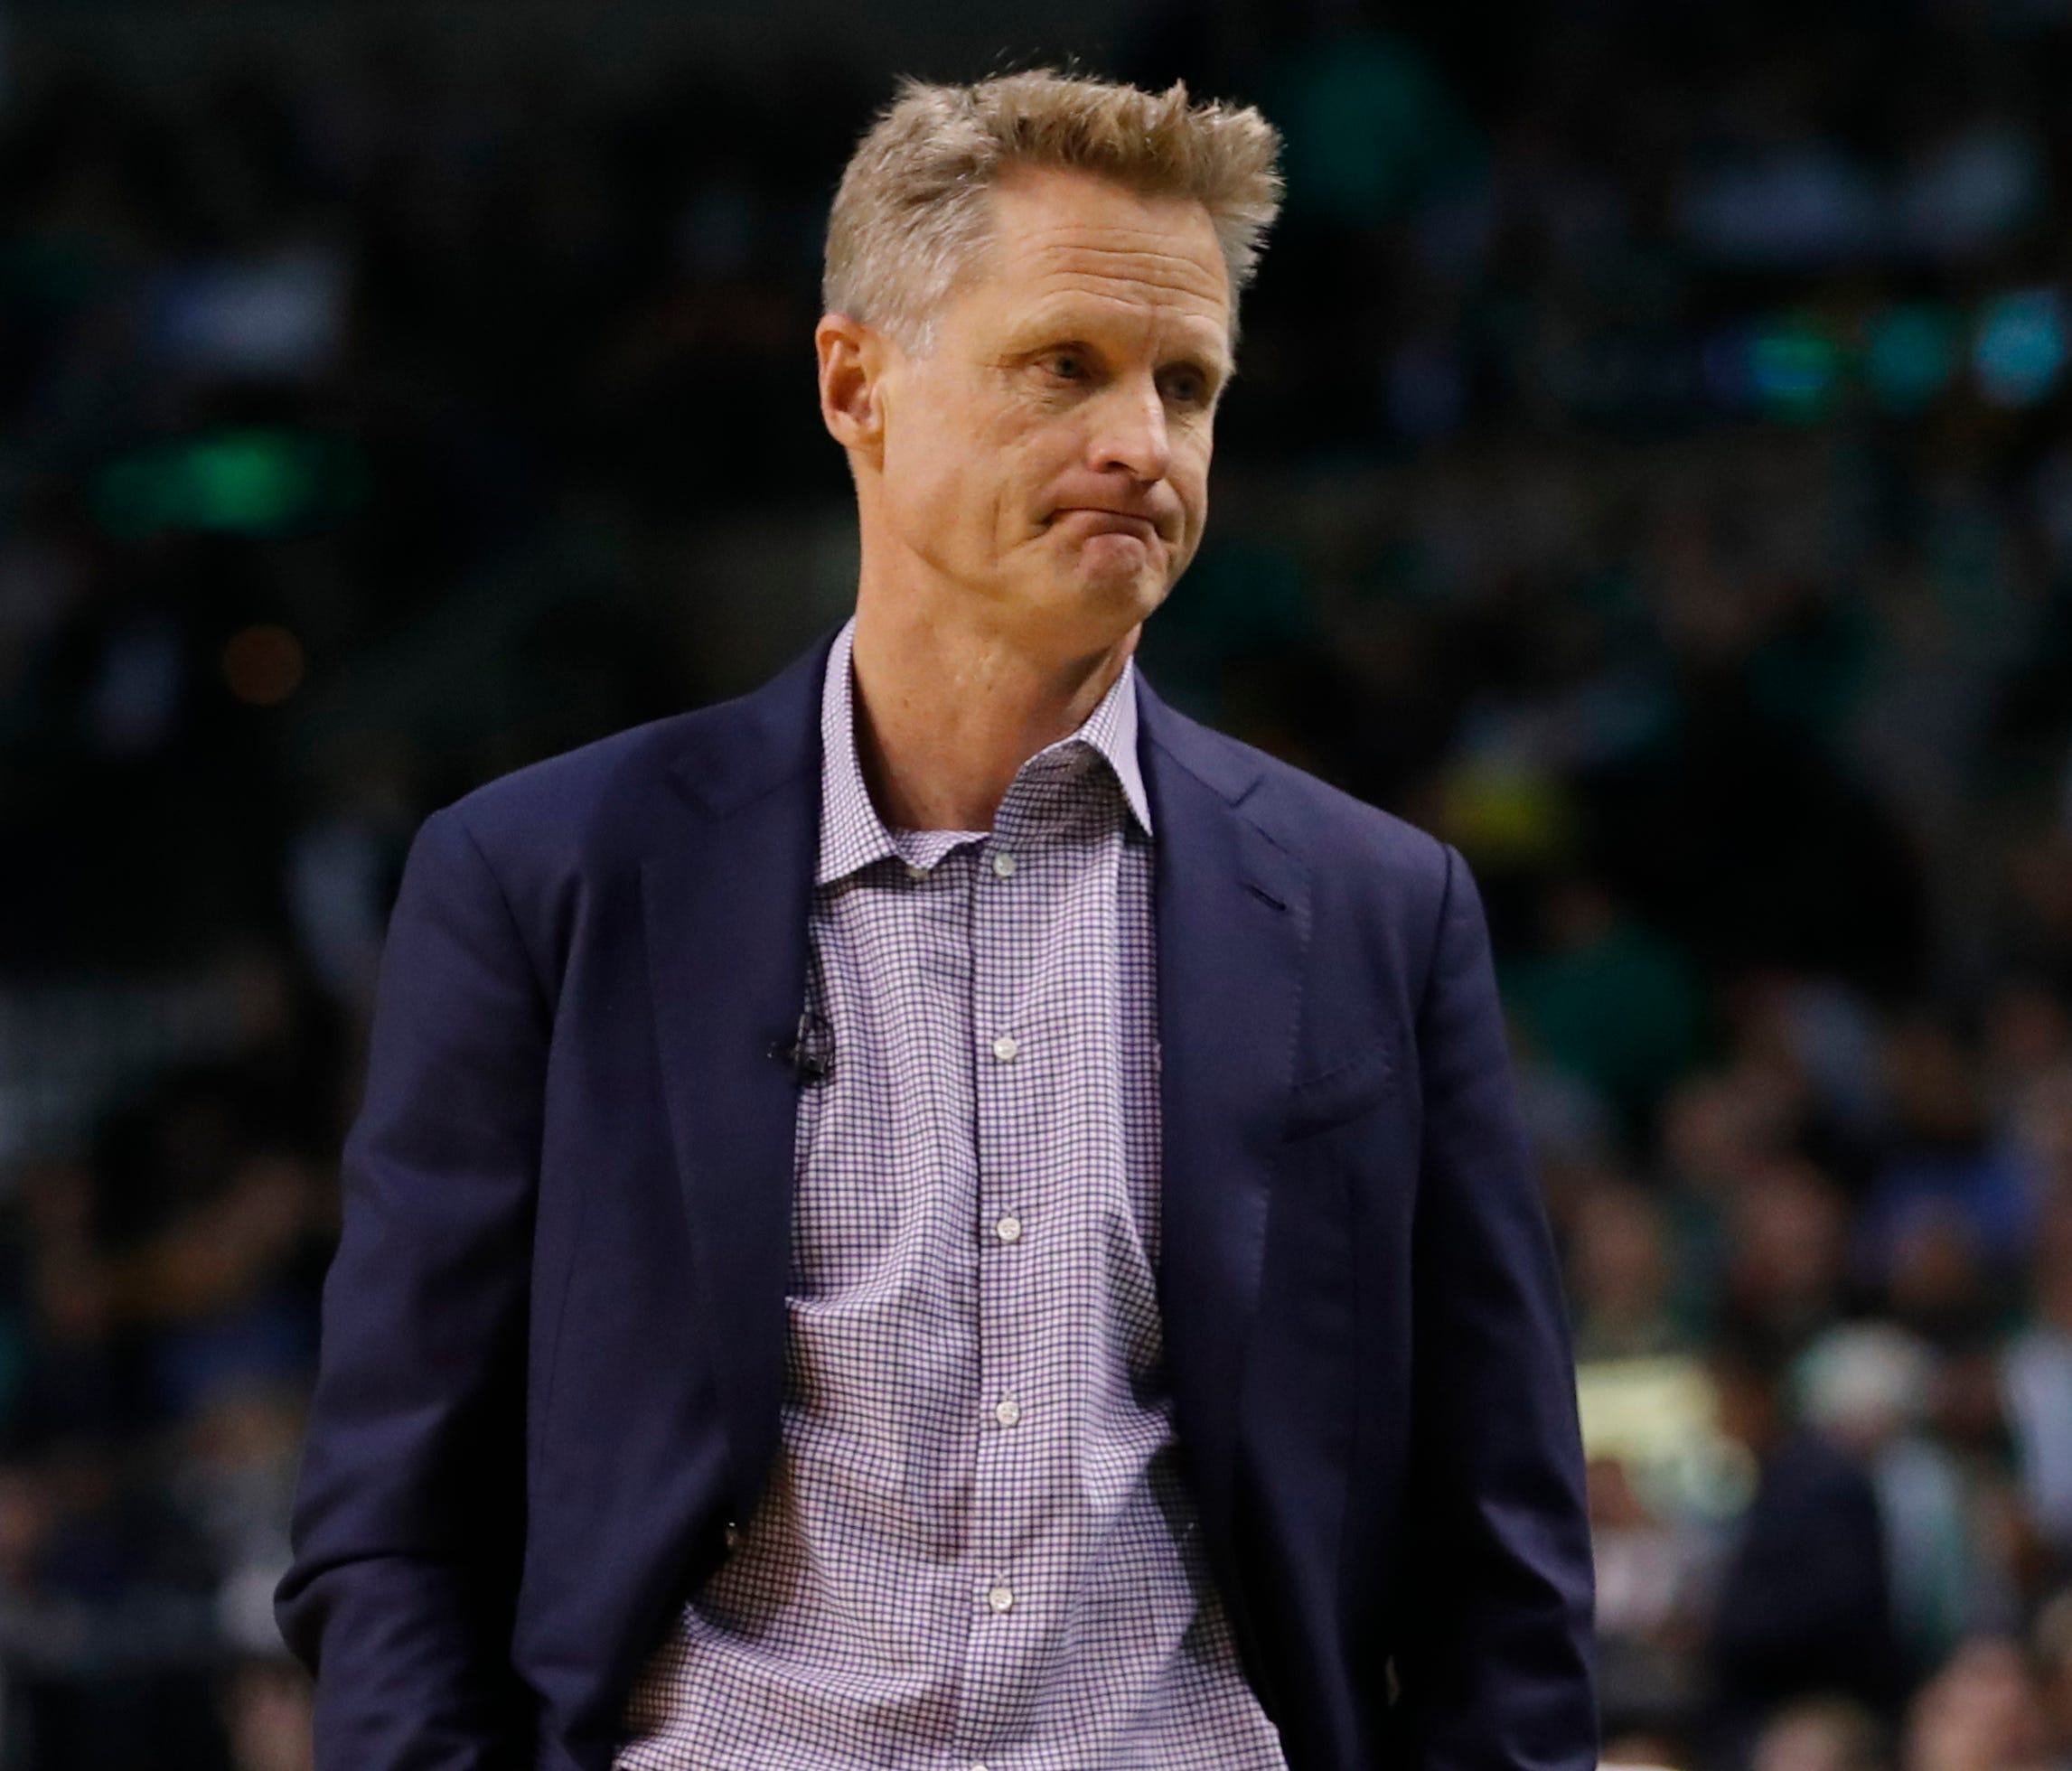 Golden State Warriors head coach Steve Kerr watches from the sideline as they take on the Boston Celtics in the second half at TD Garden.